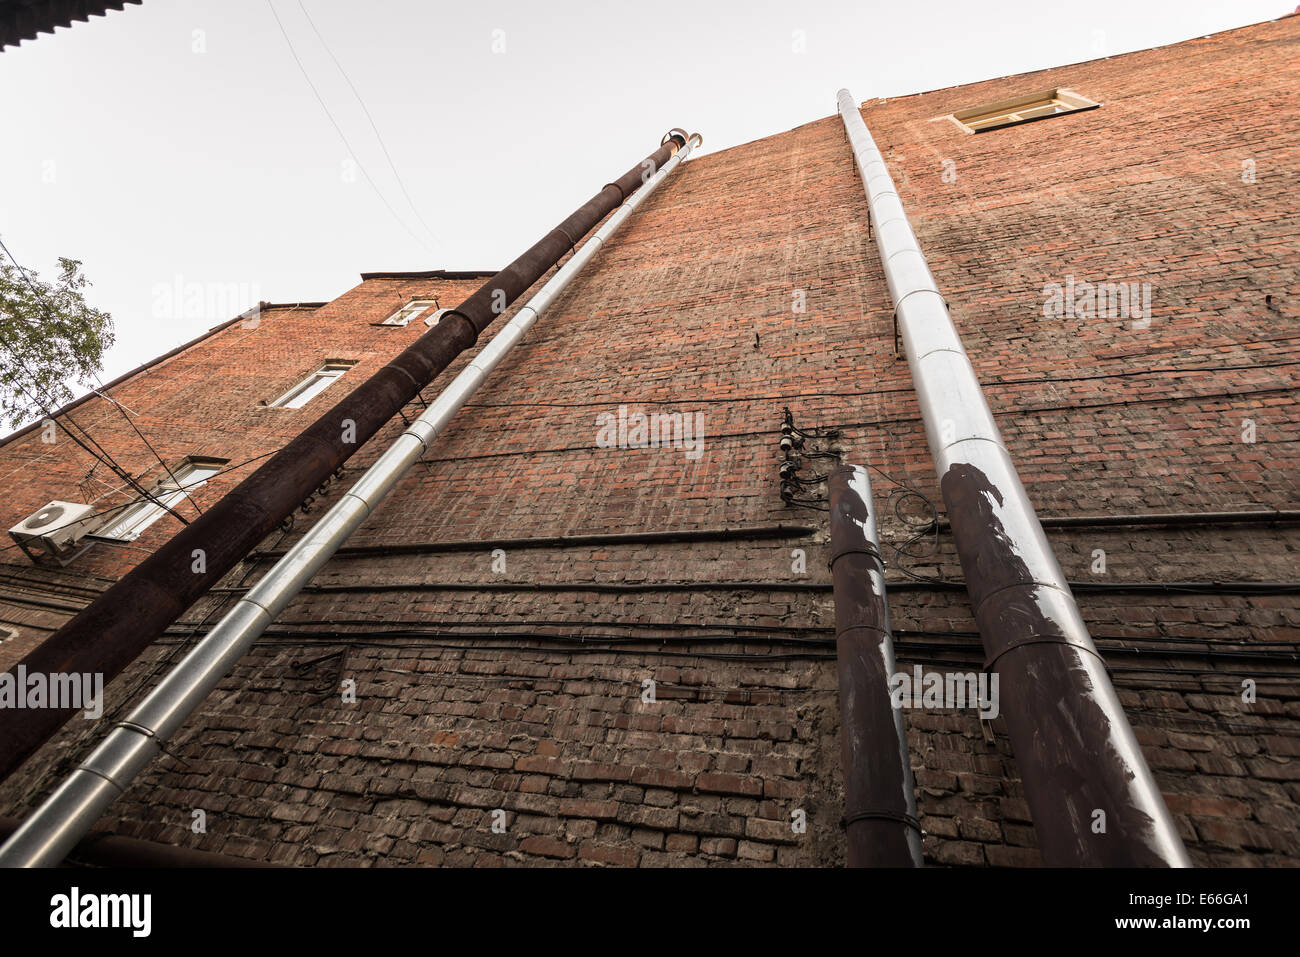 Series of pipes on a brick brown wall ukraine Stock Photo